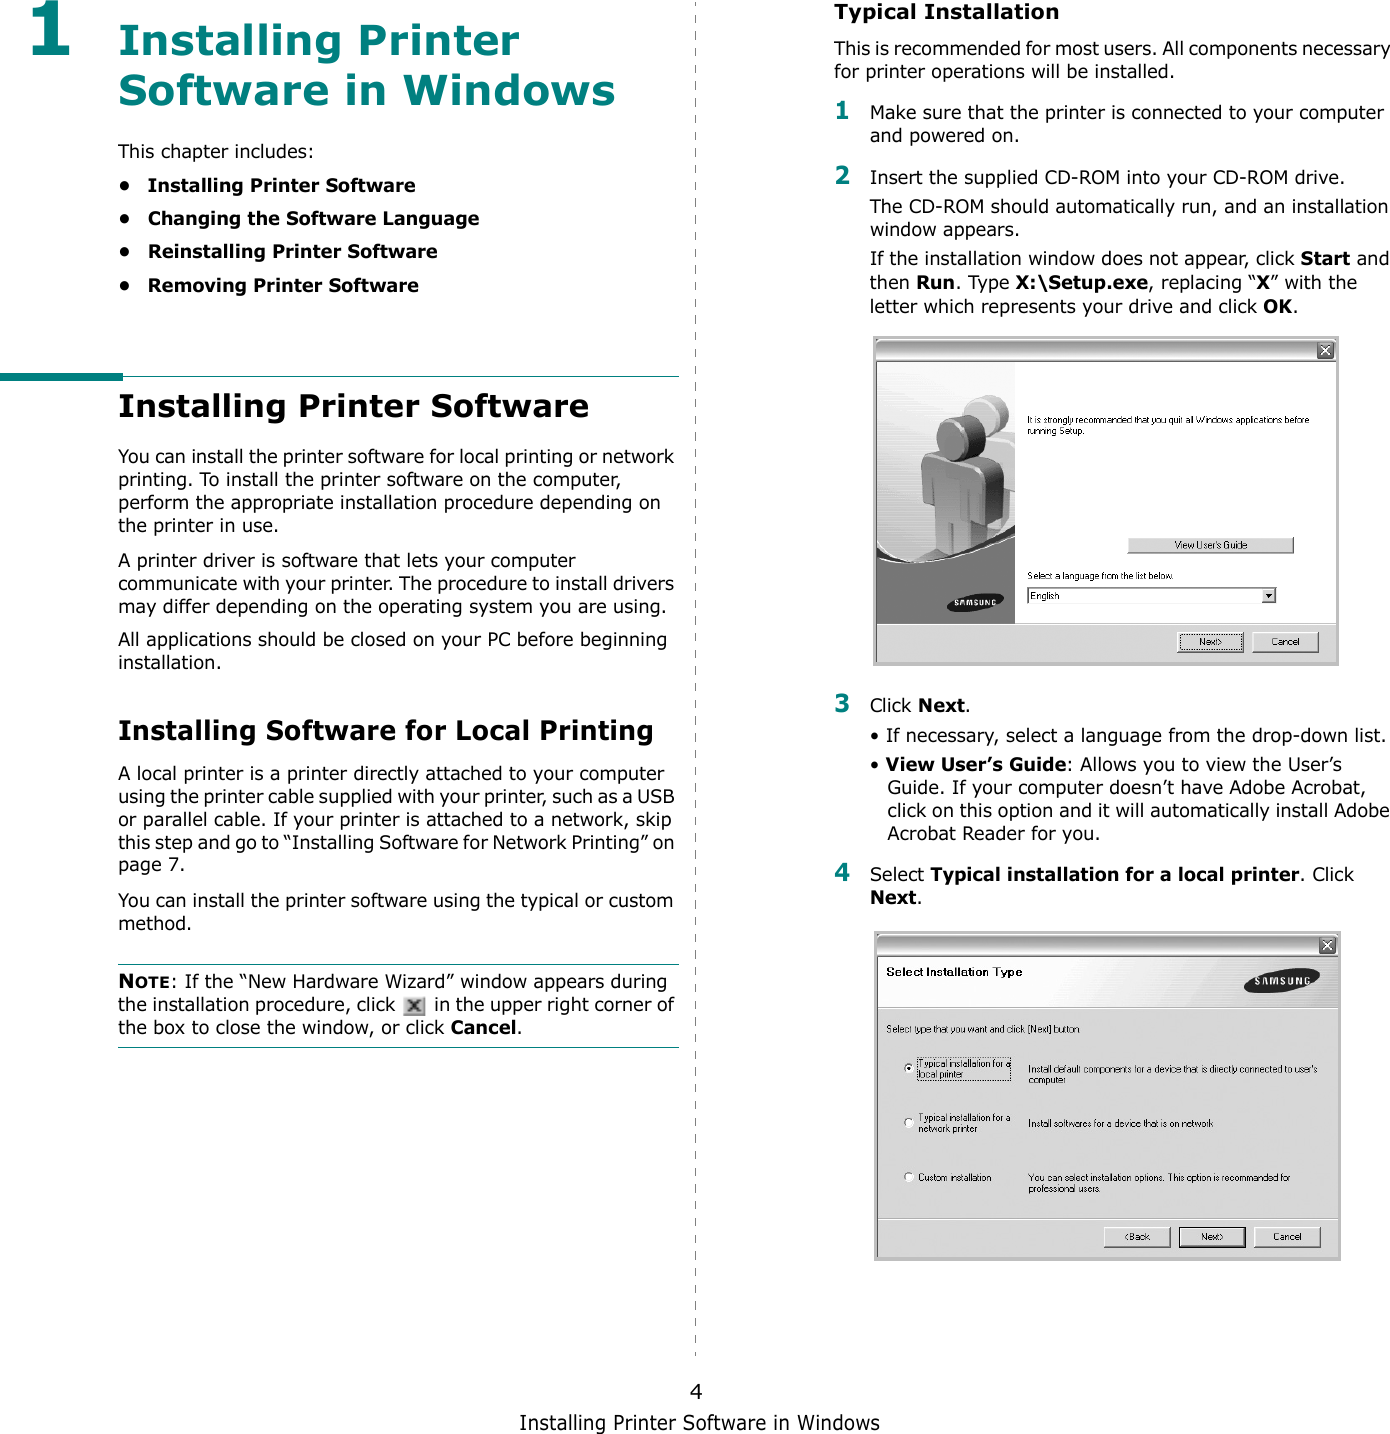 Installing Printer Software in Windows41Installing Printer Software in WindowsThis chapter includes:• Installing Printer Software• Changing the Software Language• Reinstalling Printer Software• Removing Printer SoftwareInstalling Printer SoftwareYou can install the printer software for local printing or network printing. To install the printer software on the computer, perform the appropriate installation procedure depending on the printer in use.A printer driver is software that lets your computer communicate with your printer. The procedure to install drivers may differ depending on the operating system you are using.All applications should be closed on your PC before beginning installation. Installing Software for Local PrintingA local printer is a printer directly attached to your computer using the printer cable supplied with your printer, such as a USB or parallel cable. If your printer is attached to a network, skip this step and go to “Installing Software for Network Printing” on page 7.You can install the printer software using the typical or custom method.NOTE: If the “New Hardware Wizard” window appears during the installation procedure, click   in the upper right corner of the box to close the window, or click Cancel.Typical InstallationThis is recommended for most users. All components necessary for printer operations will be installed.1Make sure that the printer is connected to your computer and powered on.2Insert the supplied CD-ROM into your CD-ROM drive.The CD-ROM should automatically run, and an installation window appears.If the installation window does not appear, click Start and then Run. Type X:\Setup.exe, replacing “X” with the letter which represents your drive and click OK.3Click Next. • If necessary, select a language from the drop-down list.• View User’s Guide: Allows you to view the User’s Guide. If your computer doesn’t have Adobe Acrobat, click on this option and it will automatically install Adobe Acrobat Reader for you.4Select Typical installation for a local printer. Click Next.